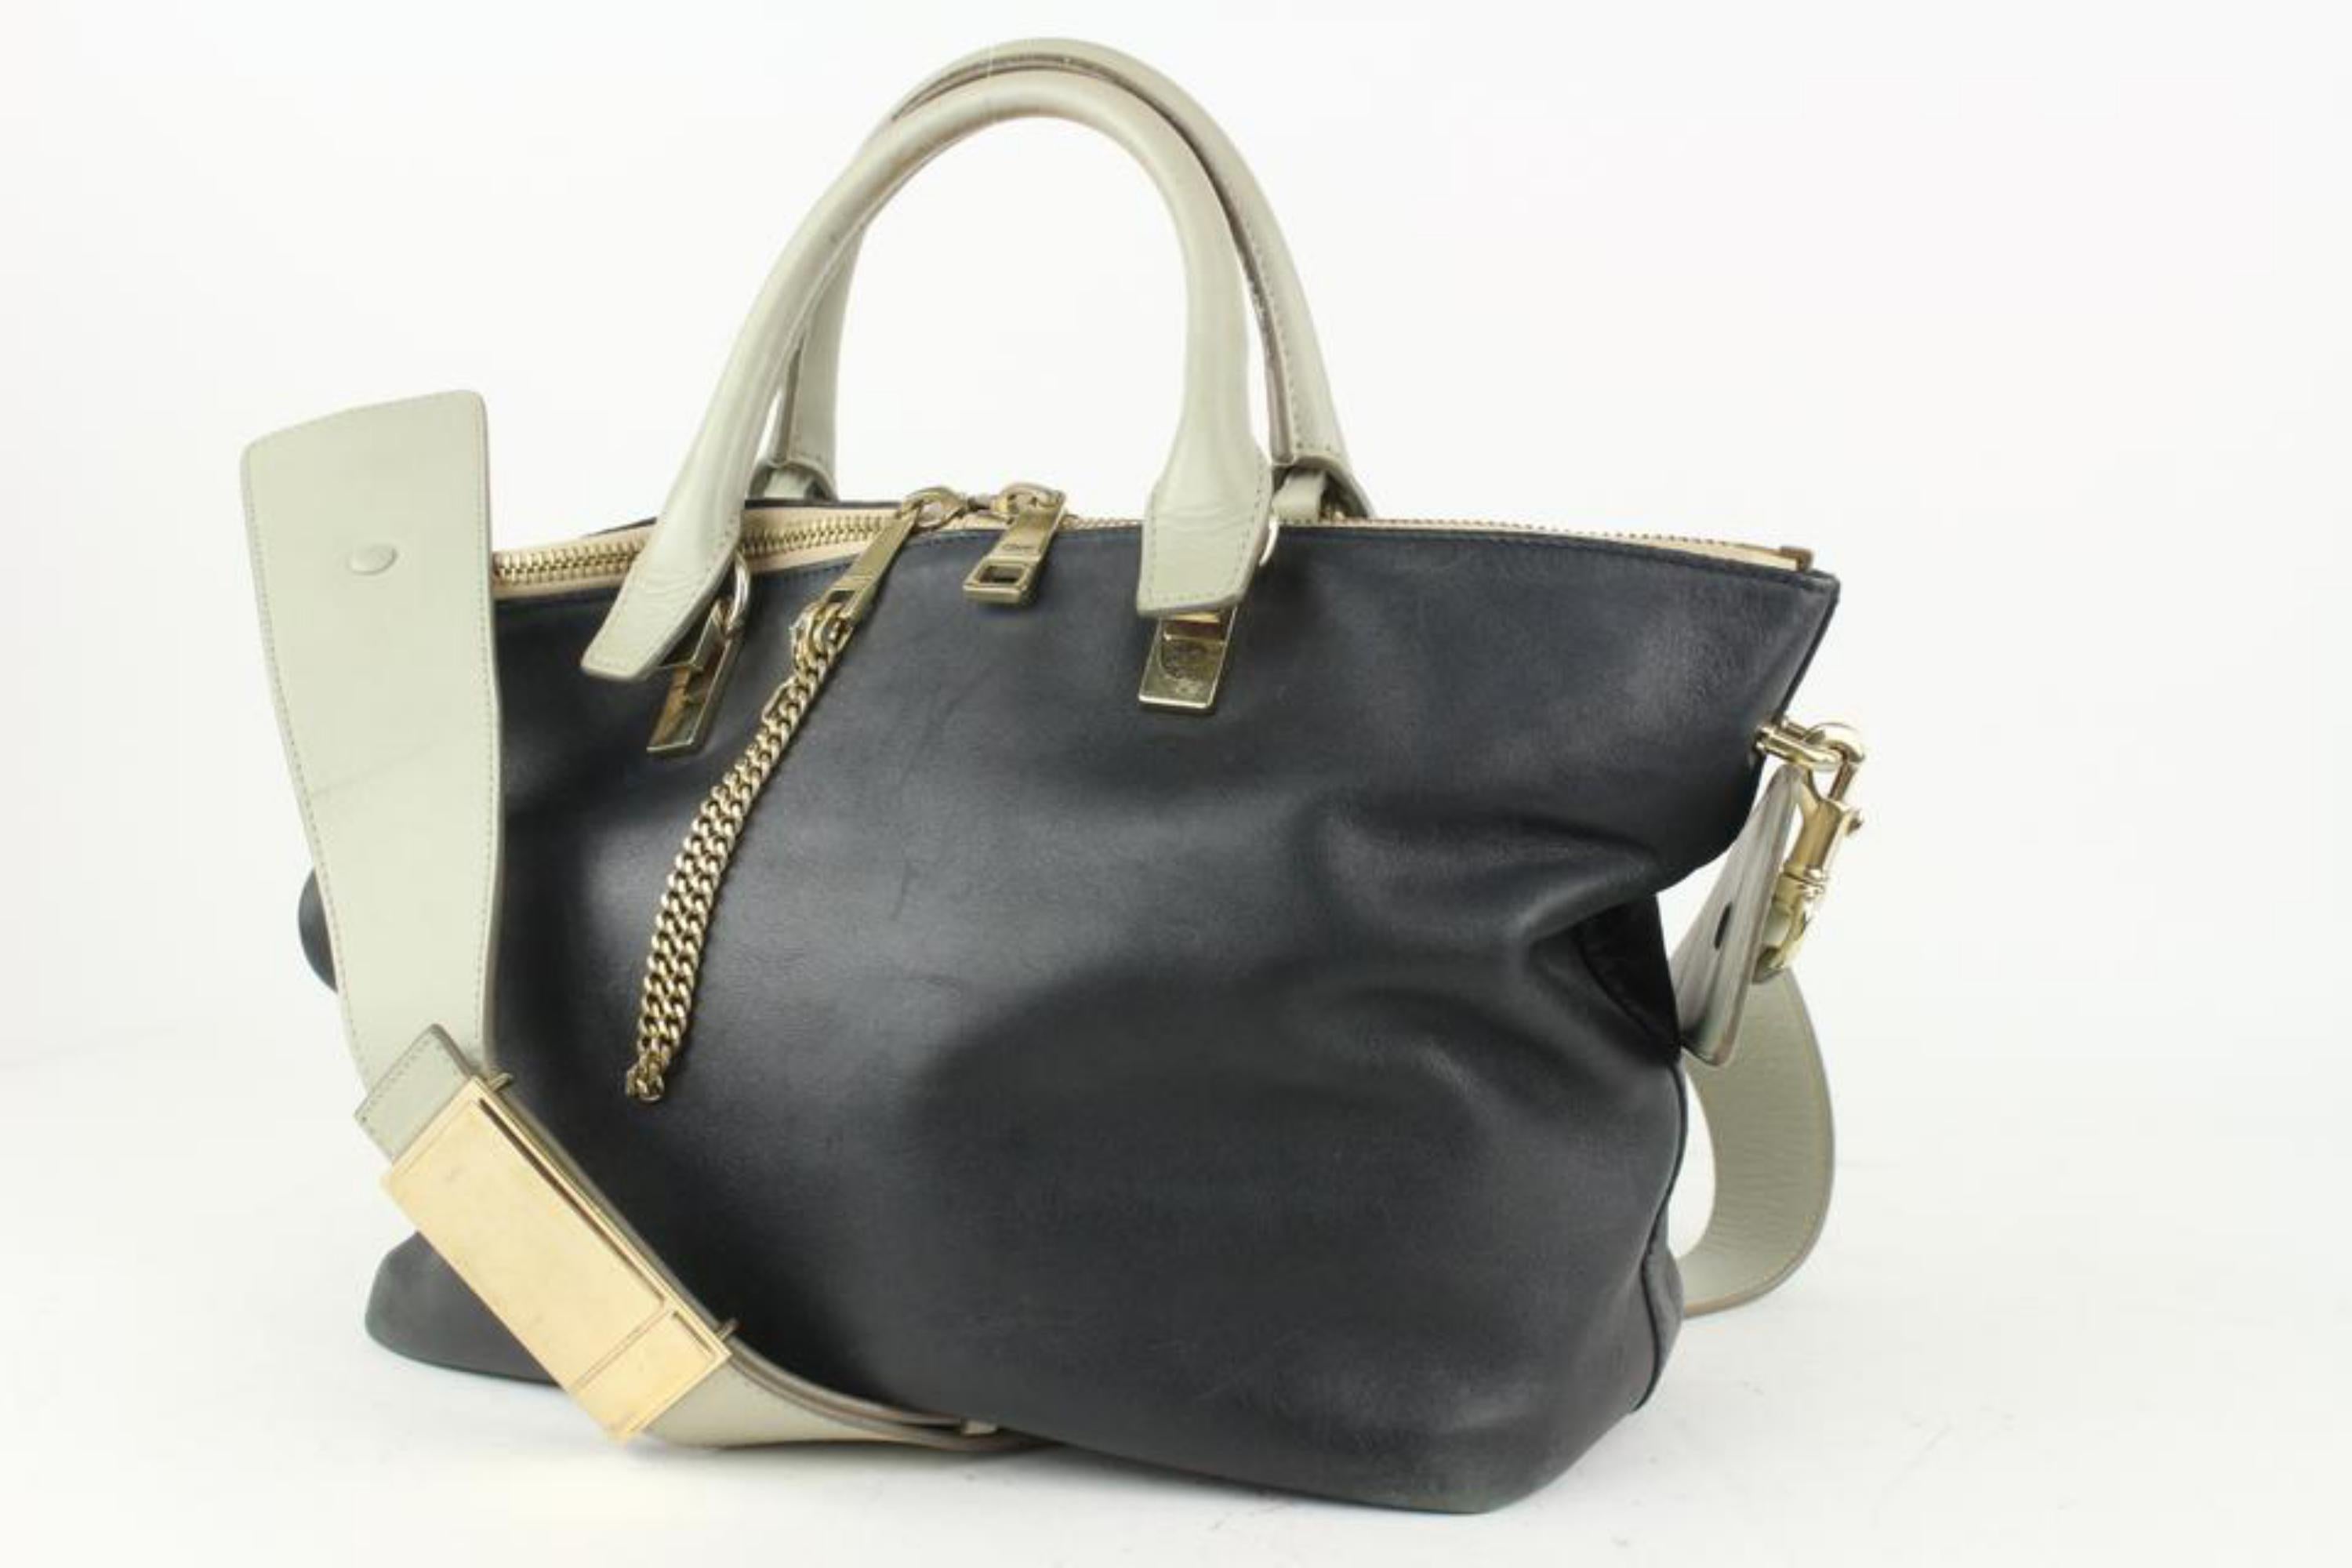 Chloé Black x Grey Leather 2way Tote 1ch1020 For Sale 6